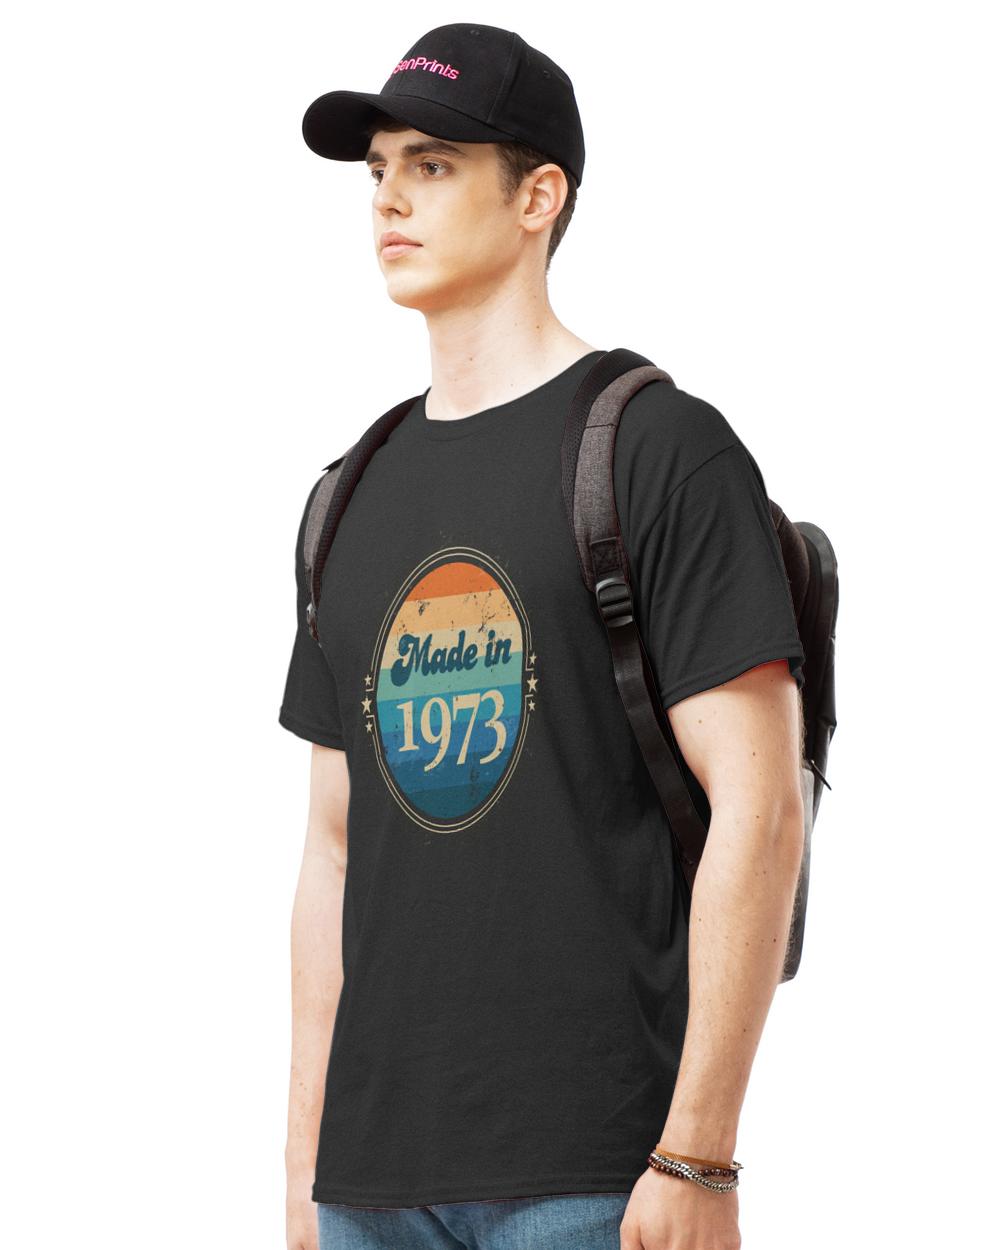 1973 T- Shirt Retro Vintage Made In 1973 T- Shirt